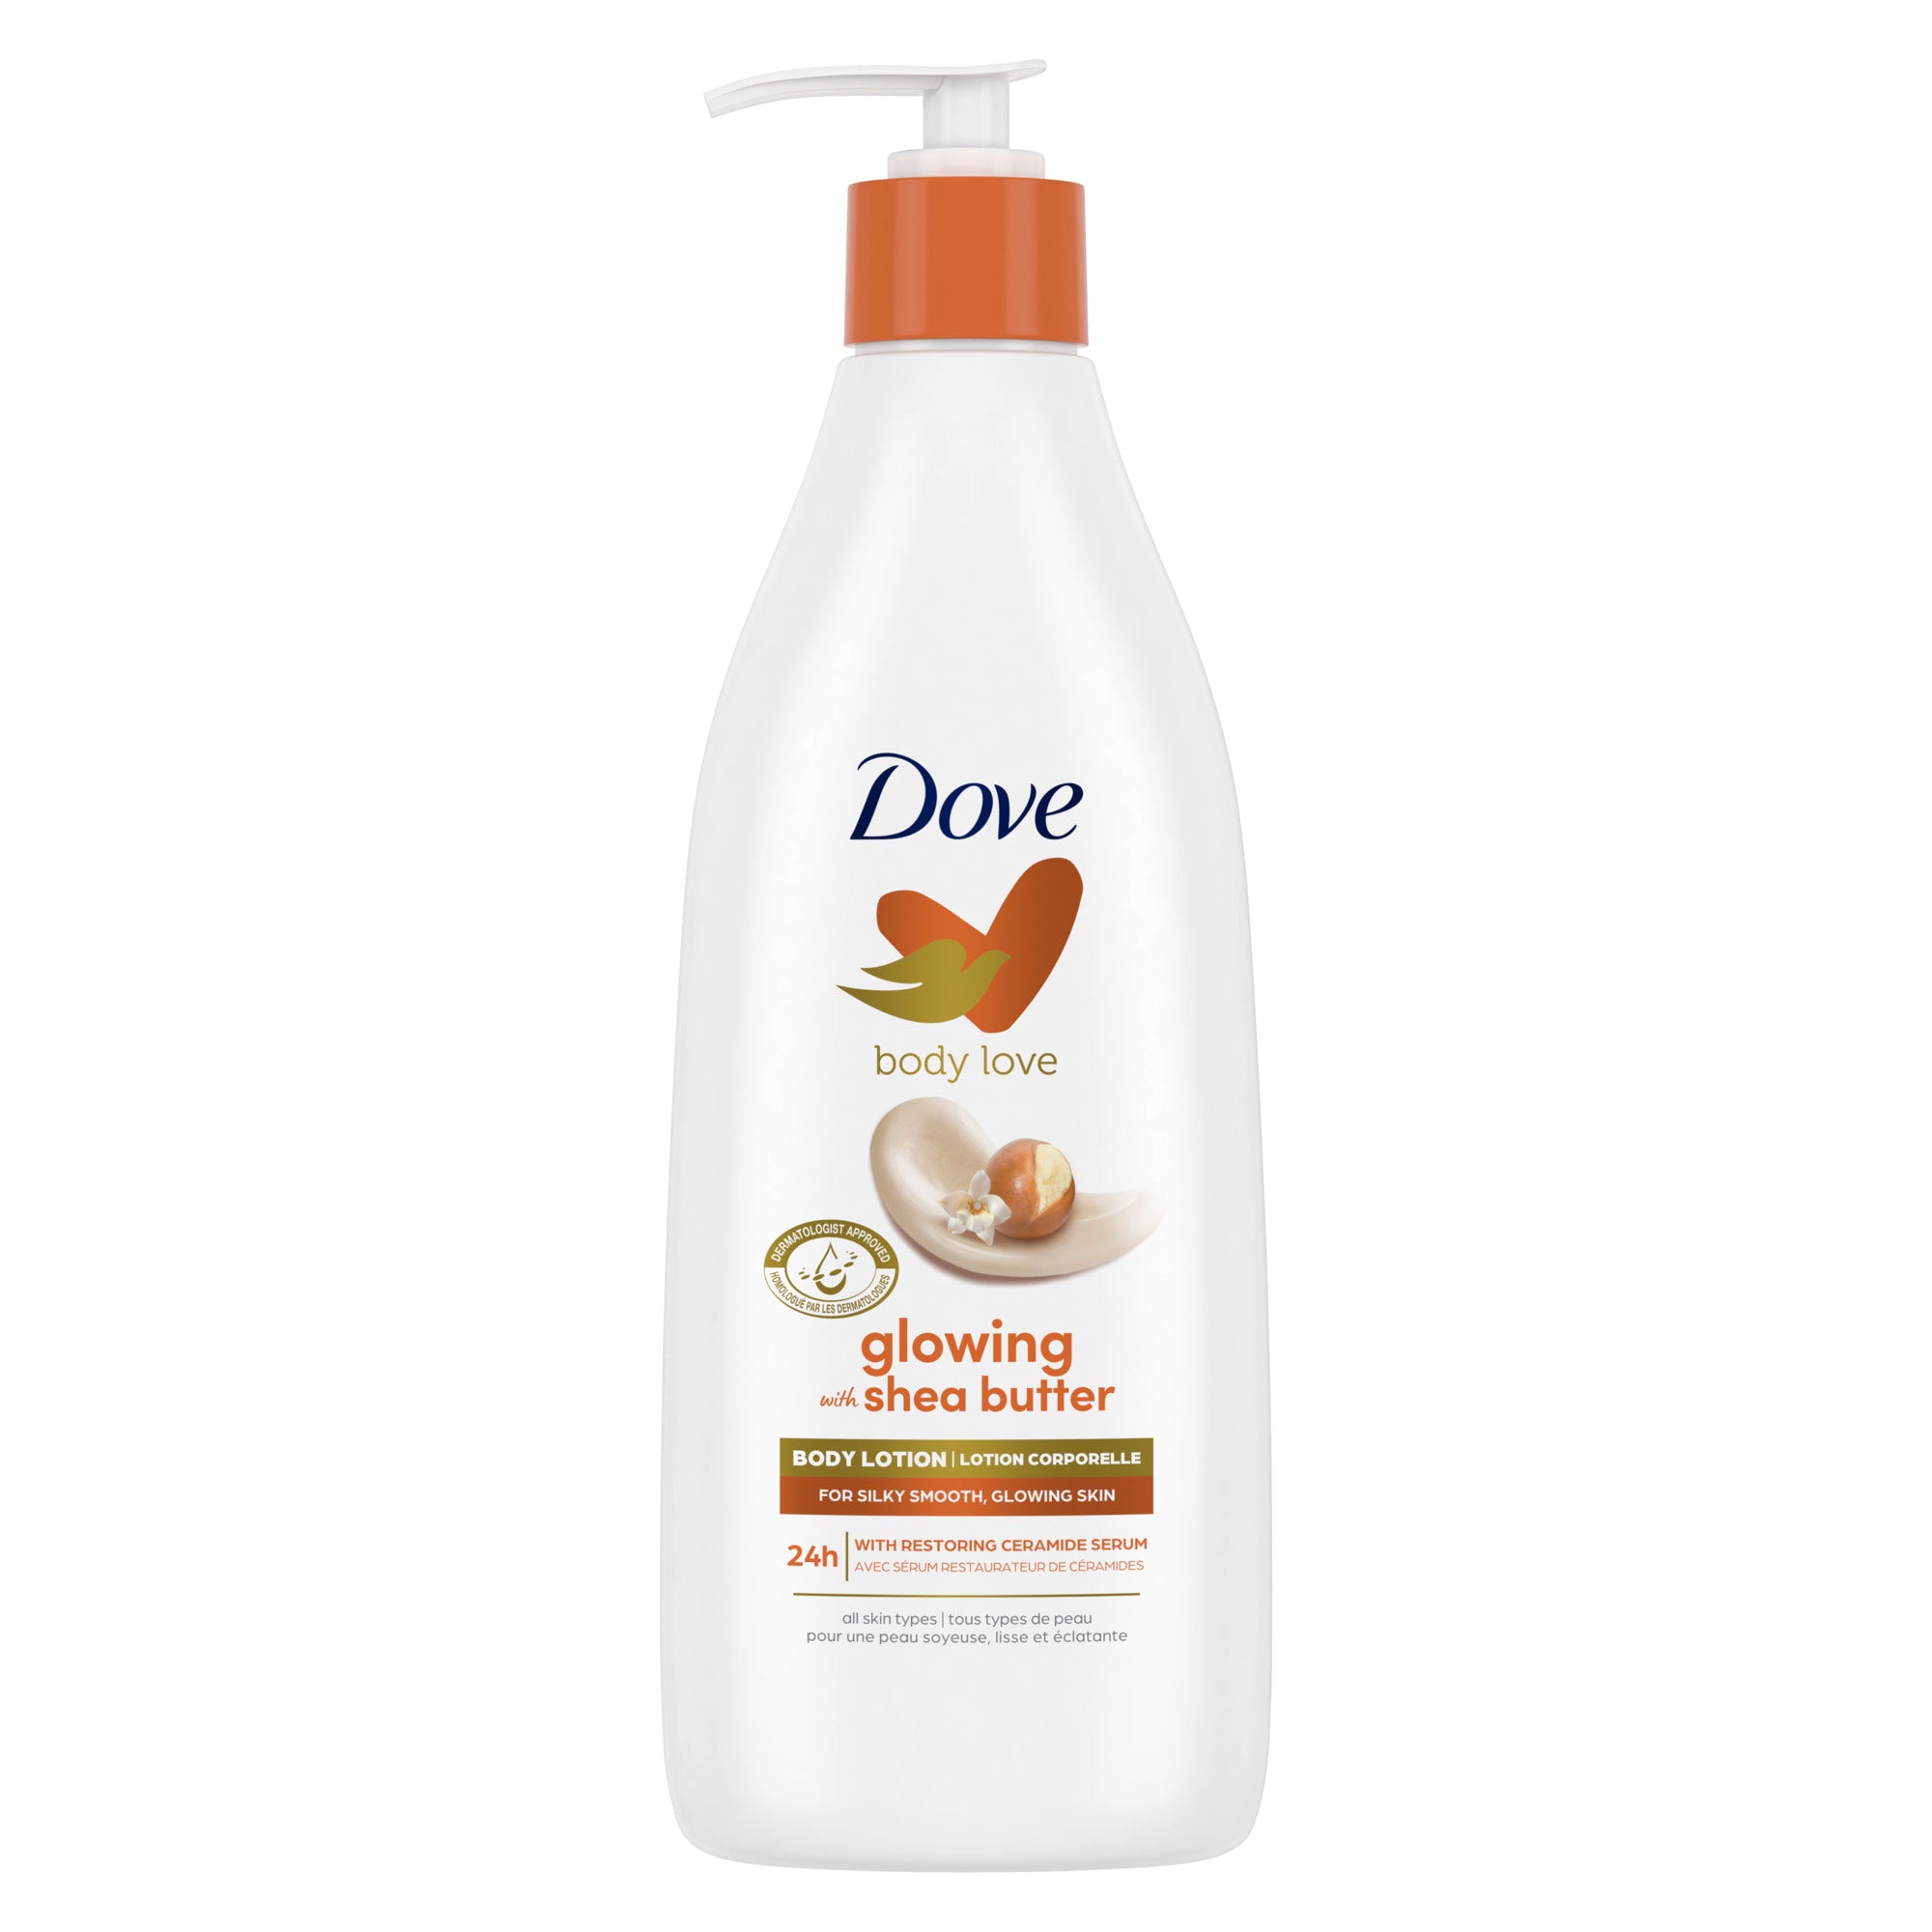 Showing the front angle view of the white and orange Dove Body Love Glowing With Shea Butter Body Lotion 400ml product packaging.